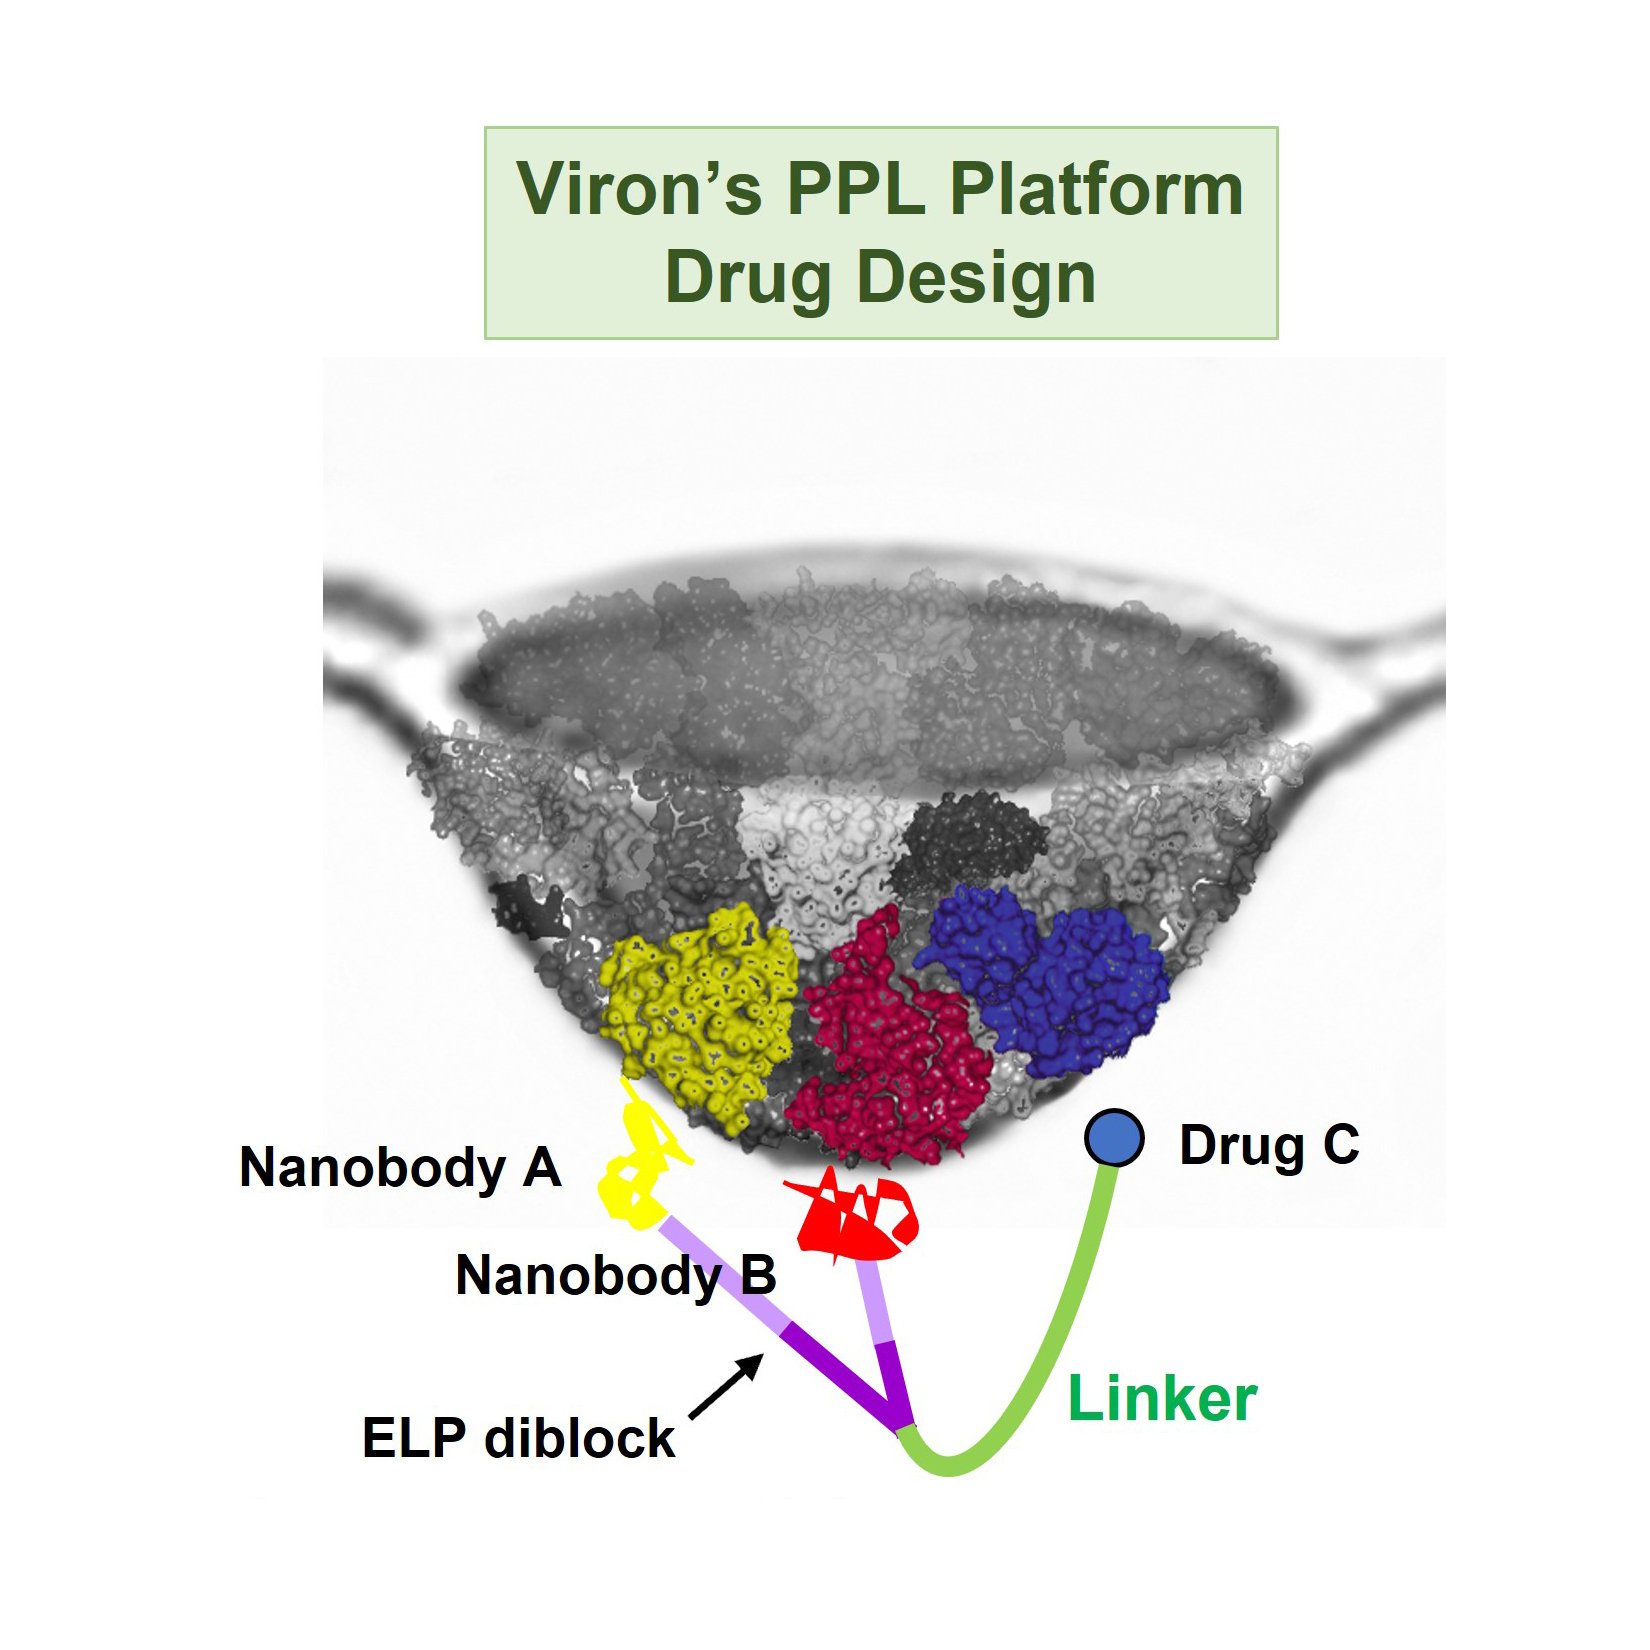 VIRON LAUNCHES POROSOME RECONSTITUTION THERAPY & IDENTIFICATION OF THE COMBINATORIAL USE OF SMALL MOLECULES AS DRUGS TO TARGET ‘UNDRUGGABLE' POROSOME PROTEINS